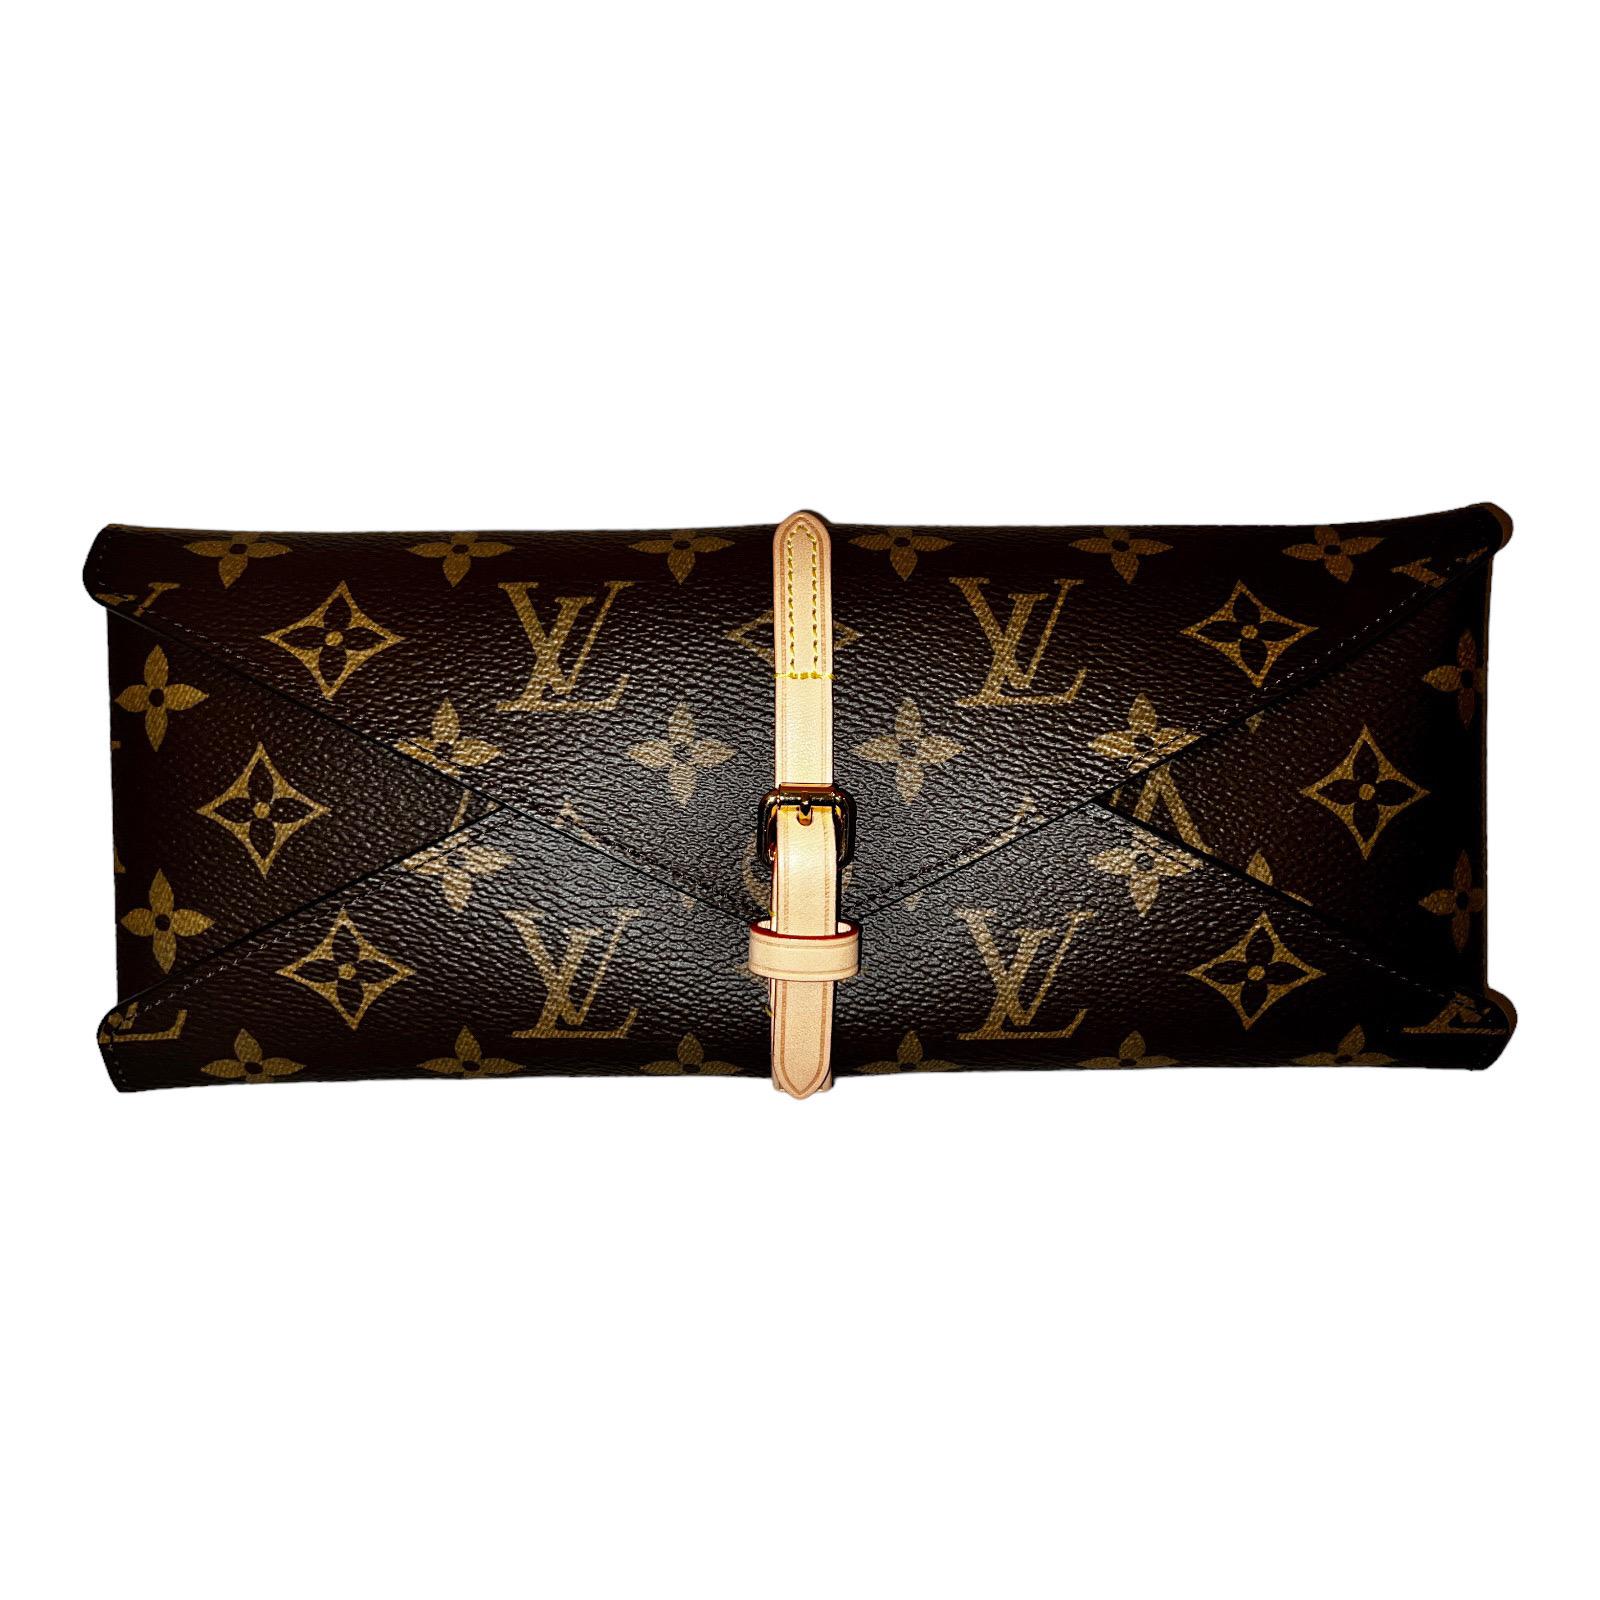 NEW Louis Vuitton Chopsticks Set in Pouch - 2 Pairs For Sale 1